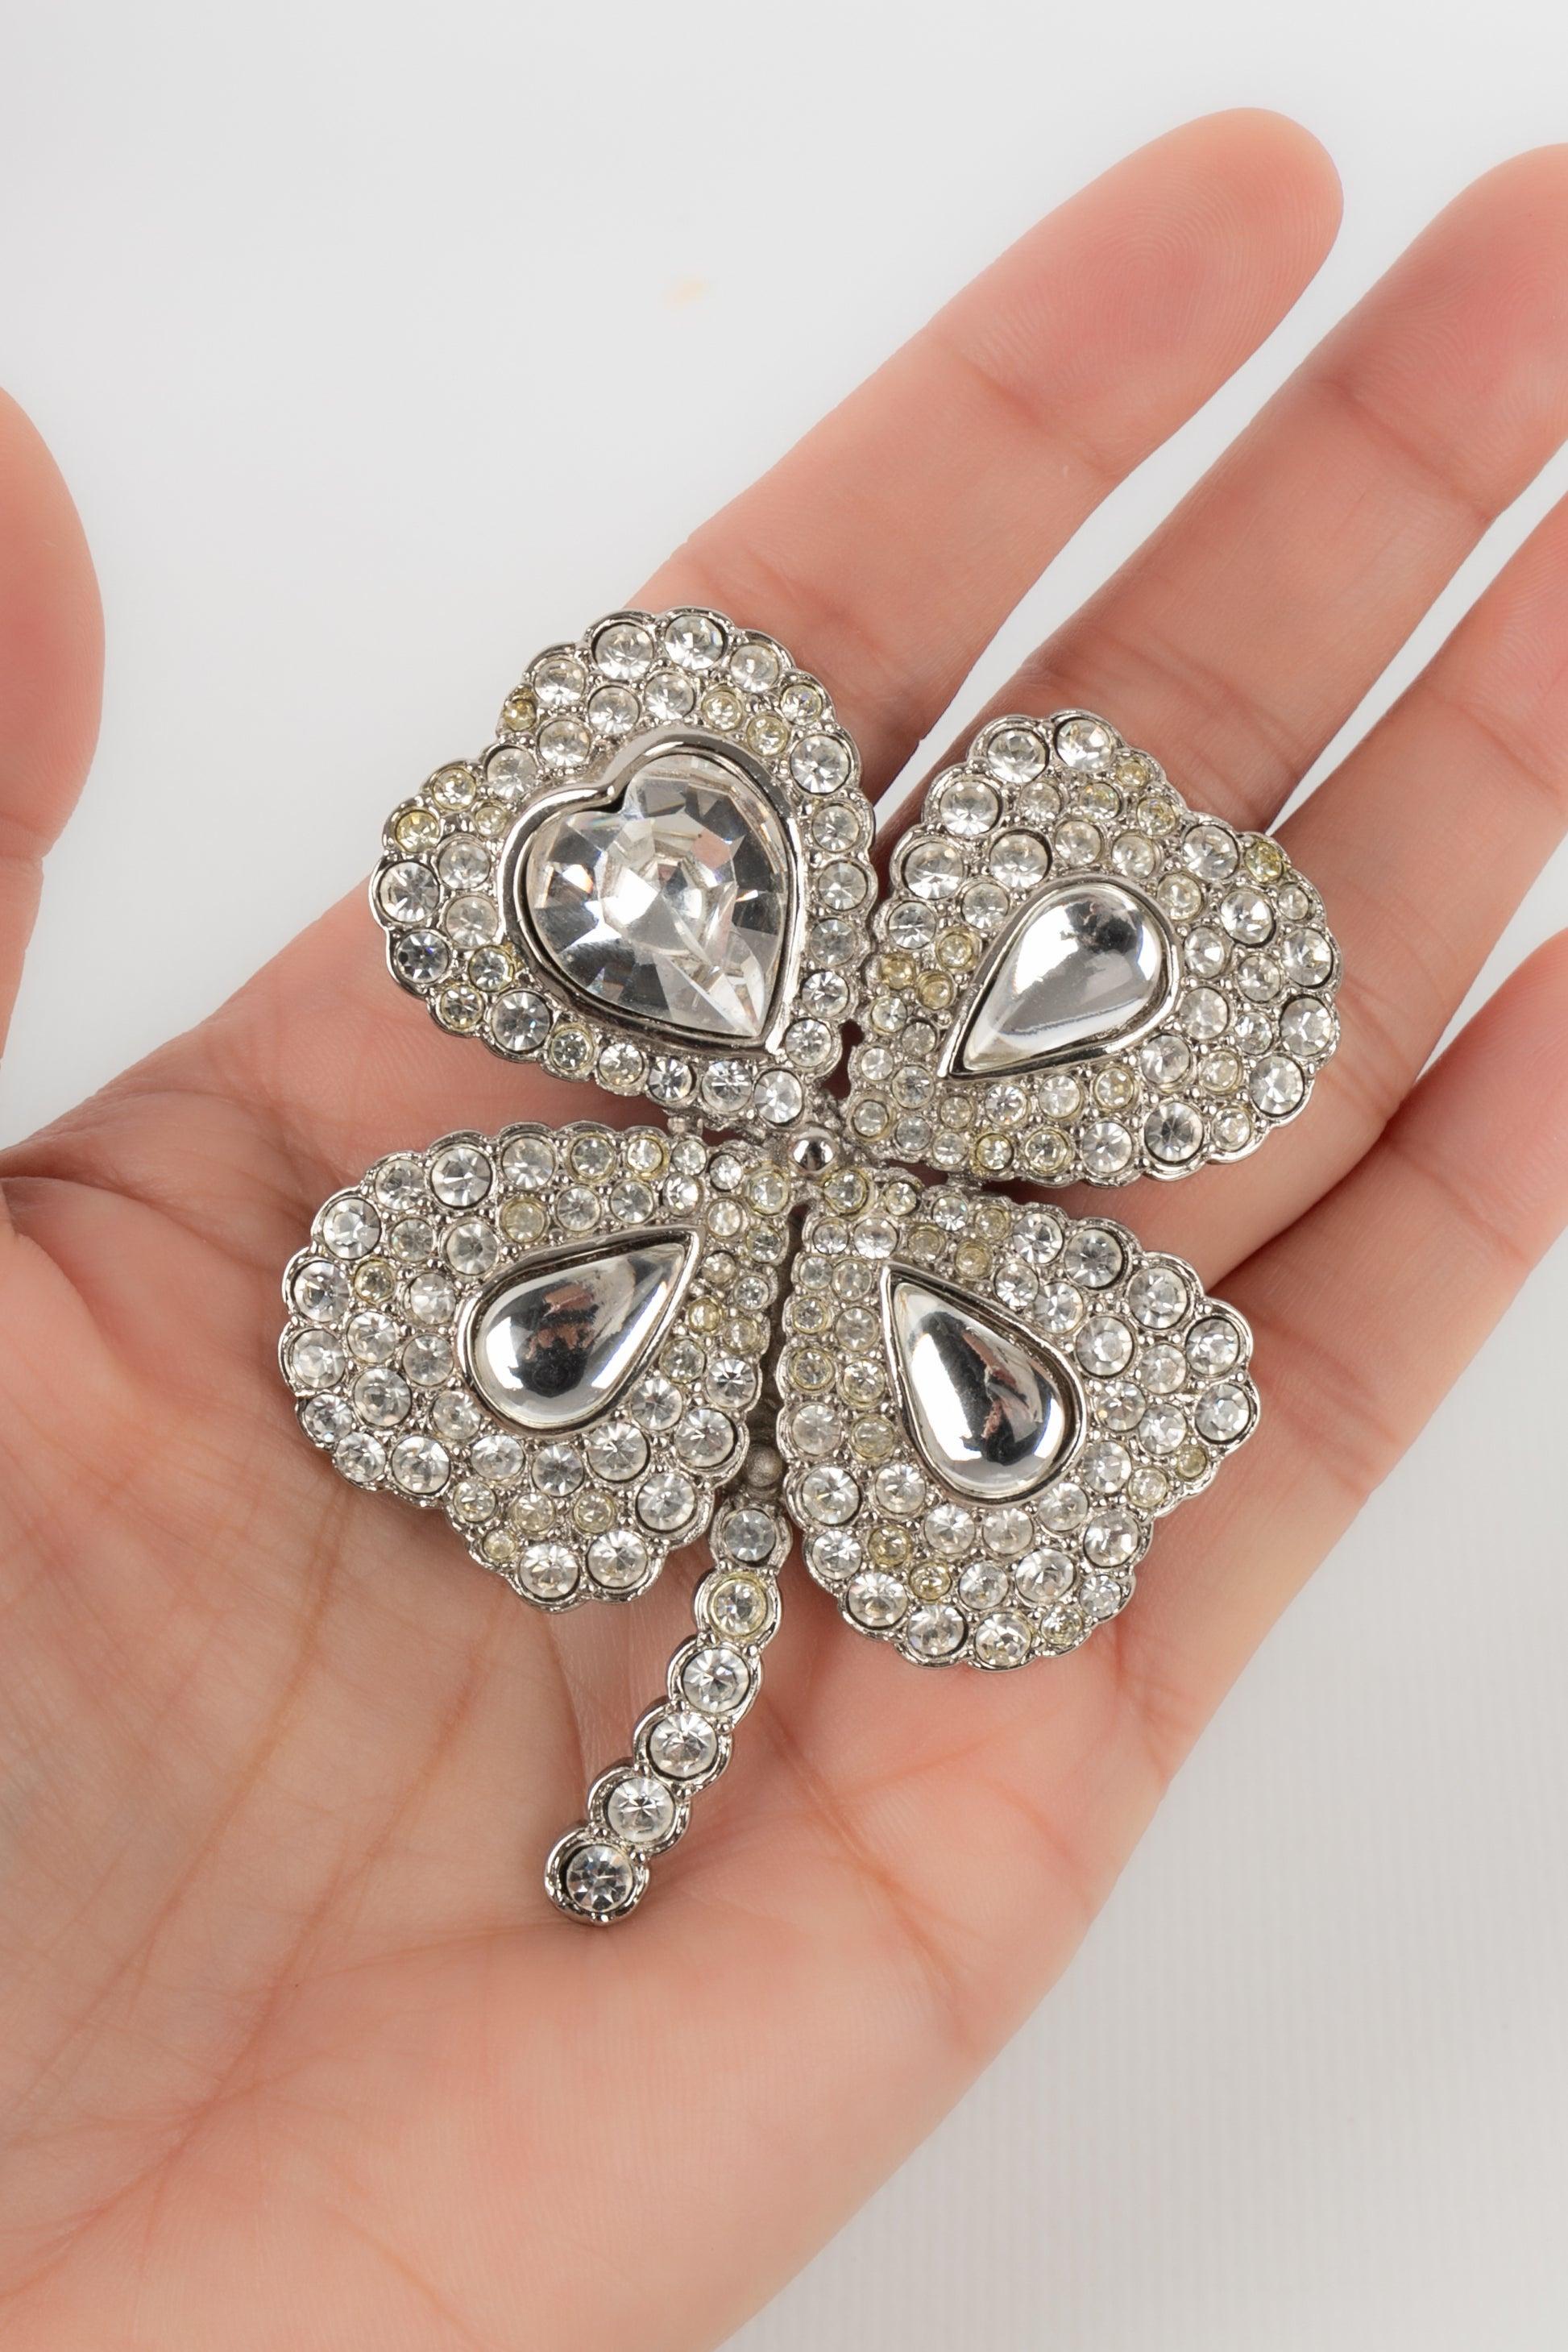 Yves Saint Laurent - (Made in France) Silvery metal pendant brooch ornamented with rhinestones and representing a four-leaf clover.

Additional information:
Condition: Very good condition
Dimensions: 7 cm x 5.5 cm

Seller Reference: BR153